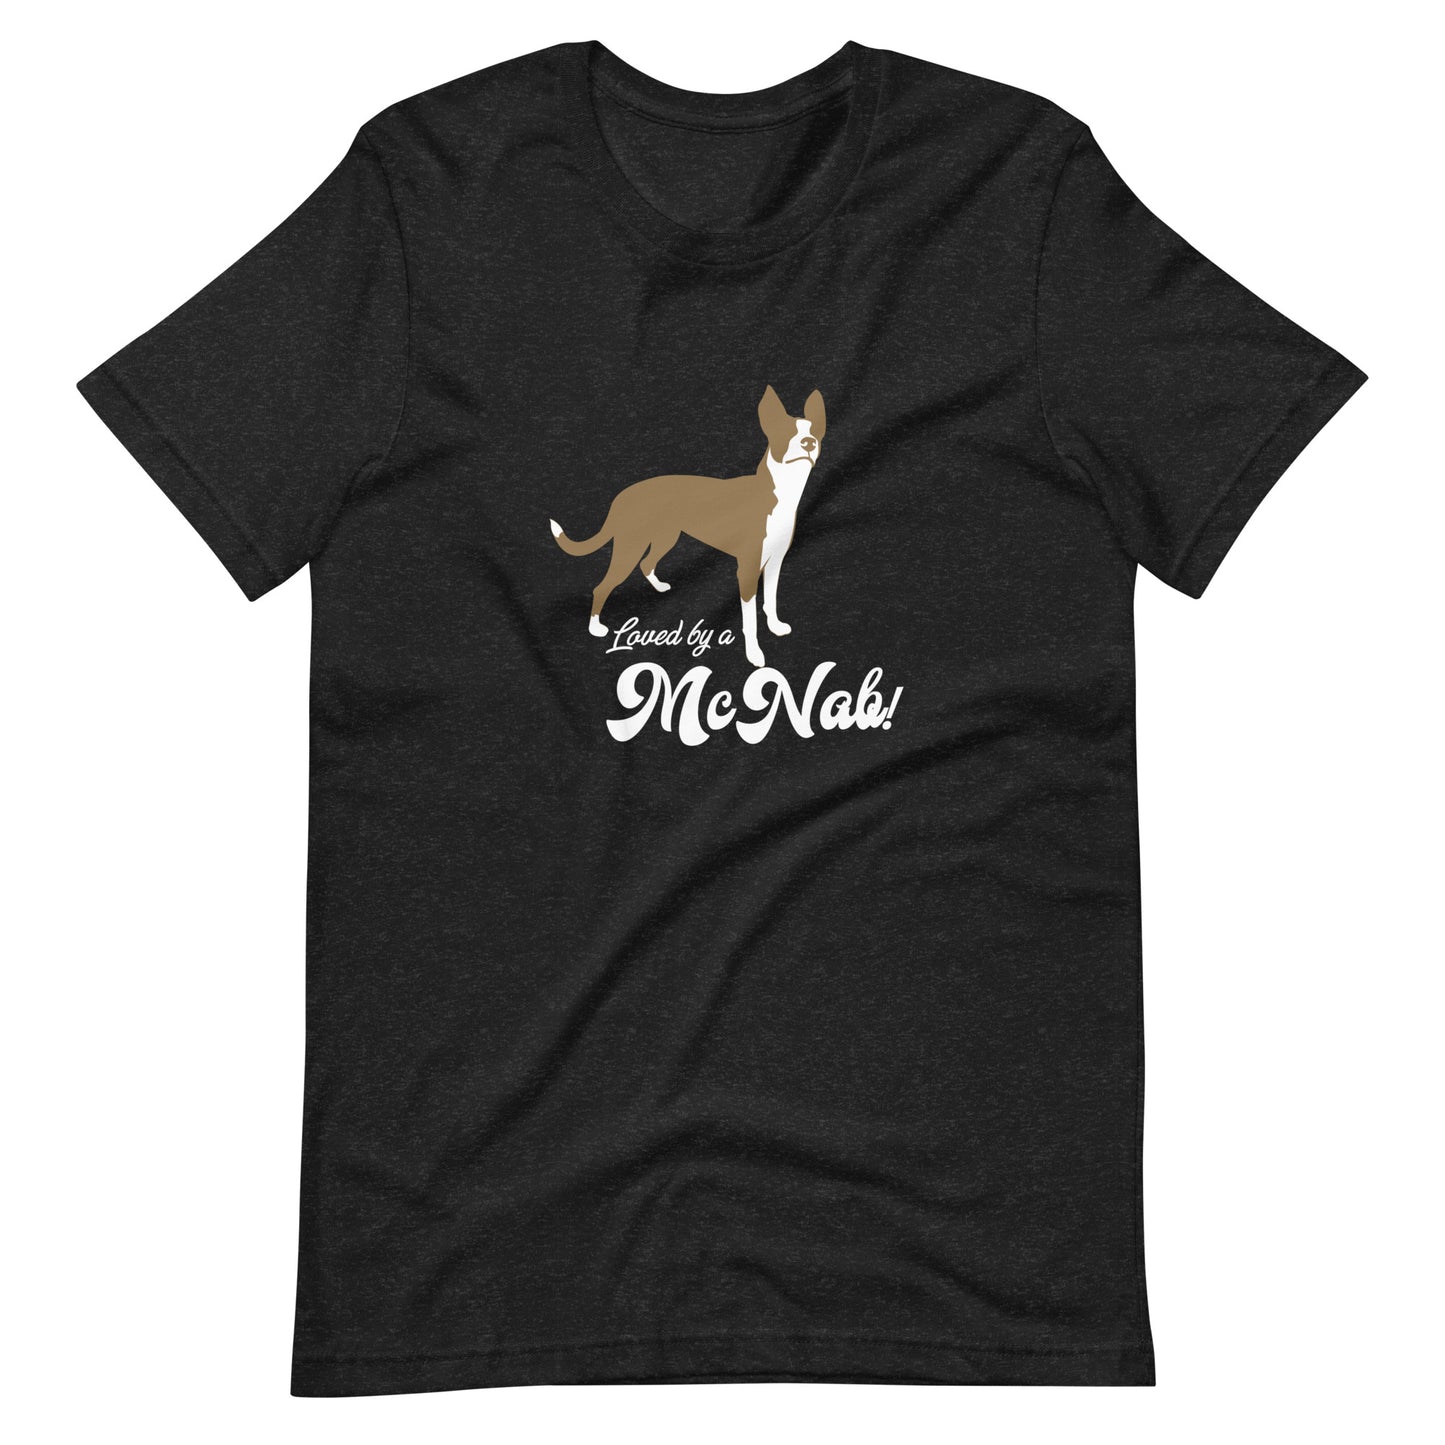 LOVED BY - MCNAB Unisex t-shirt